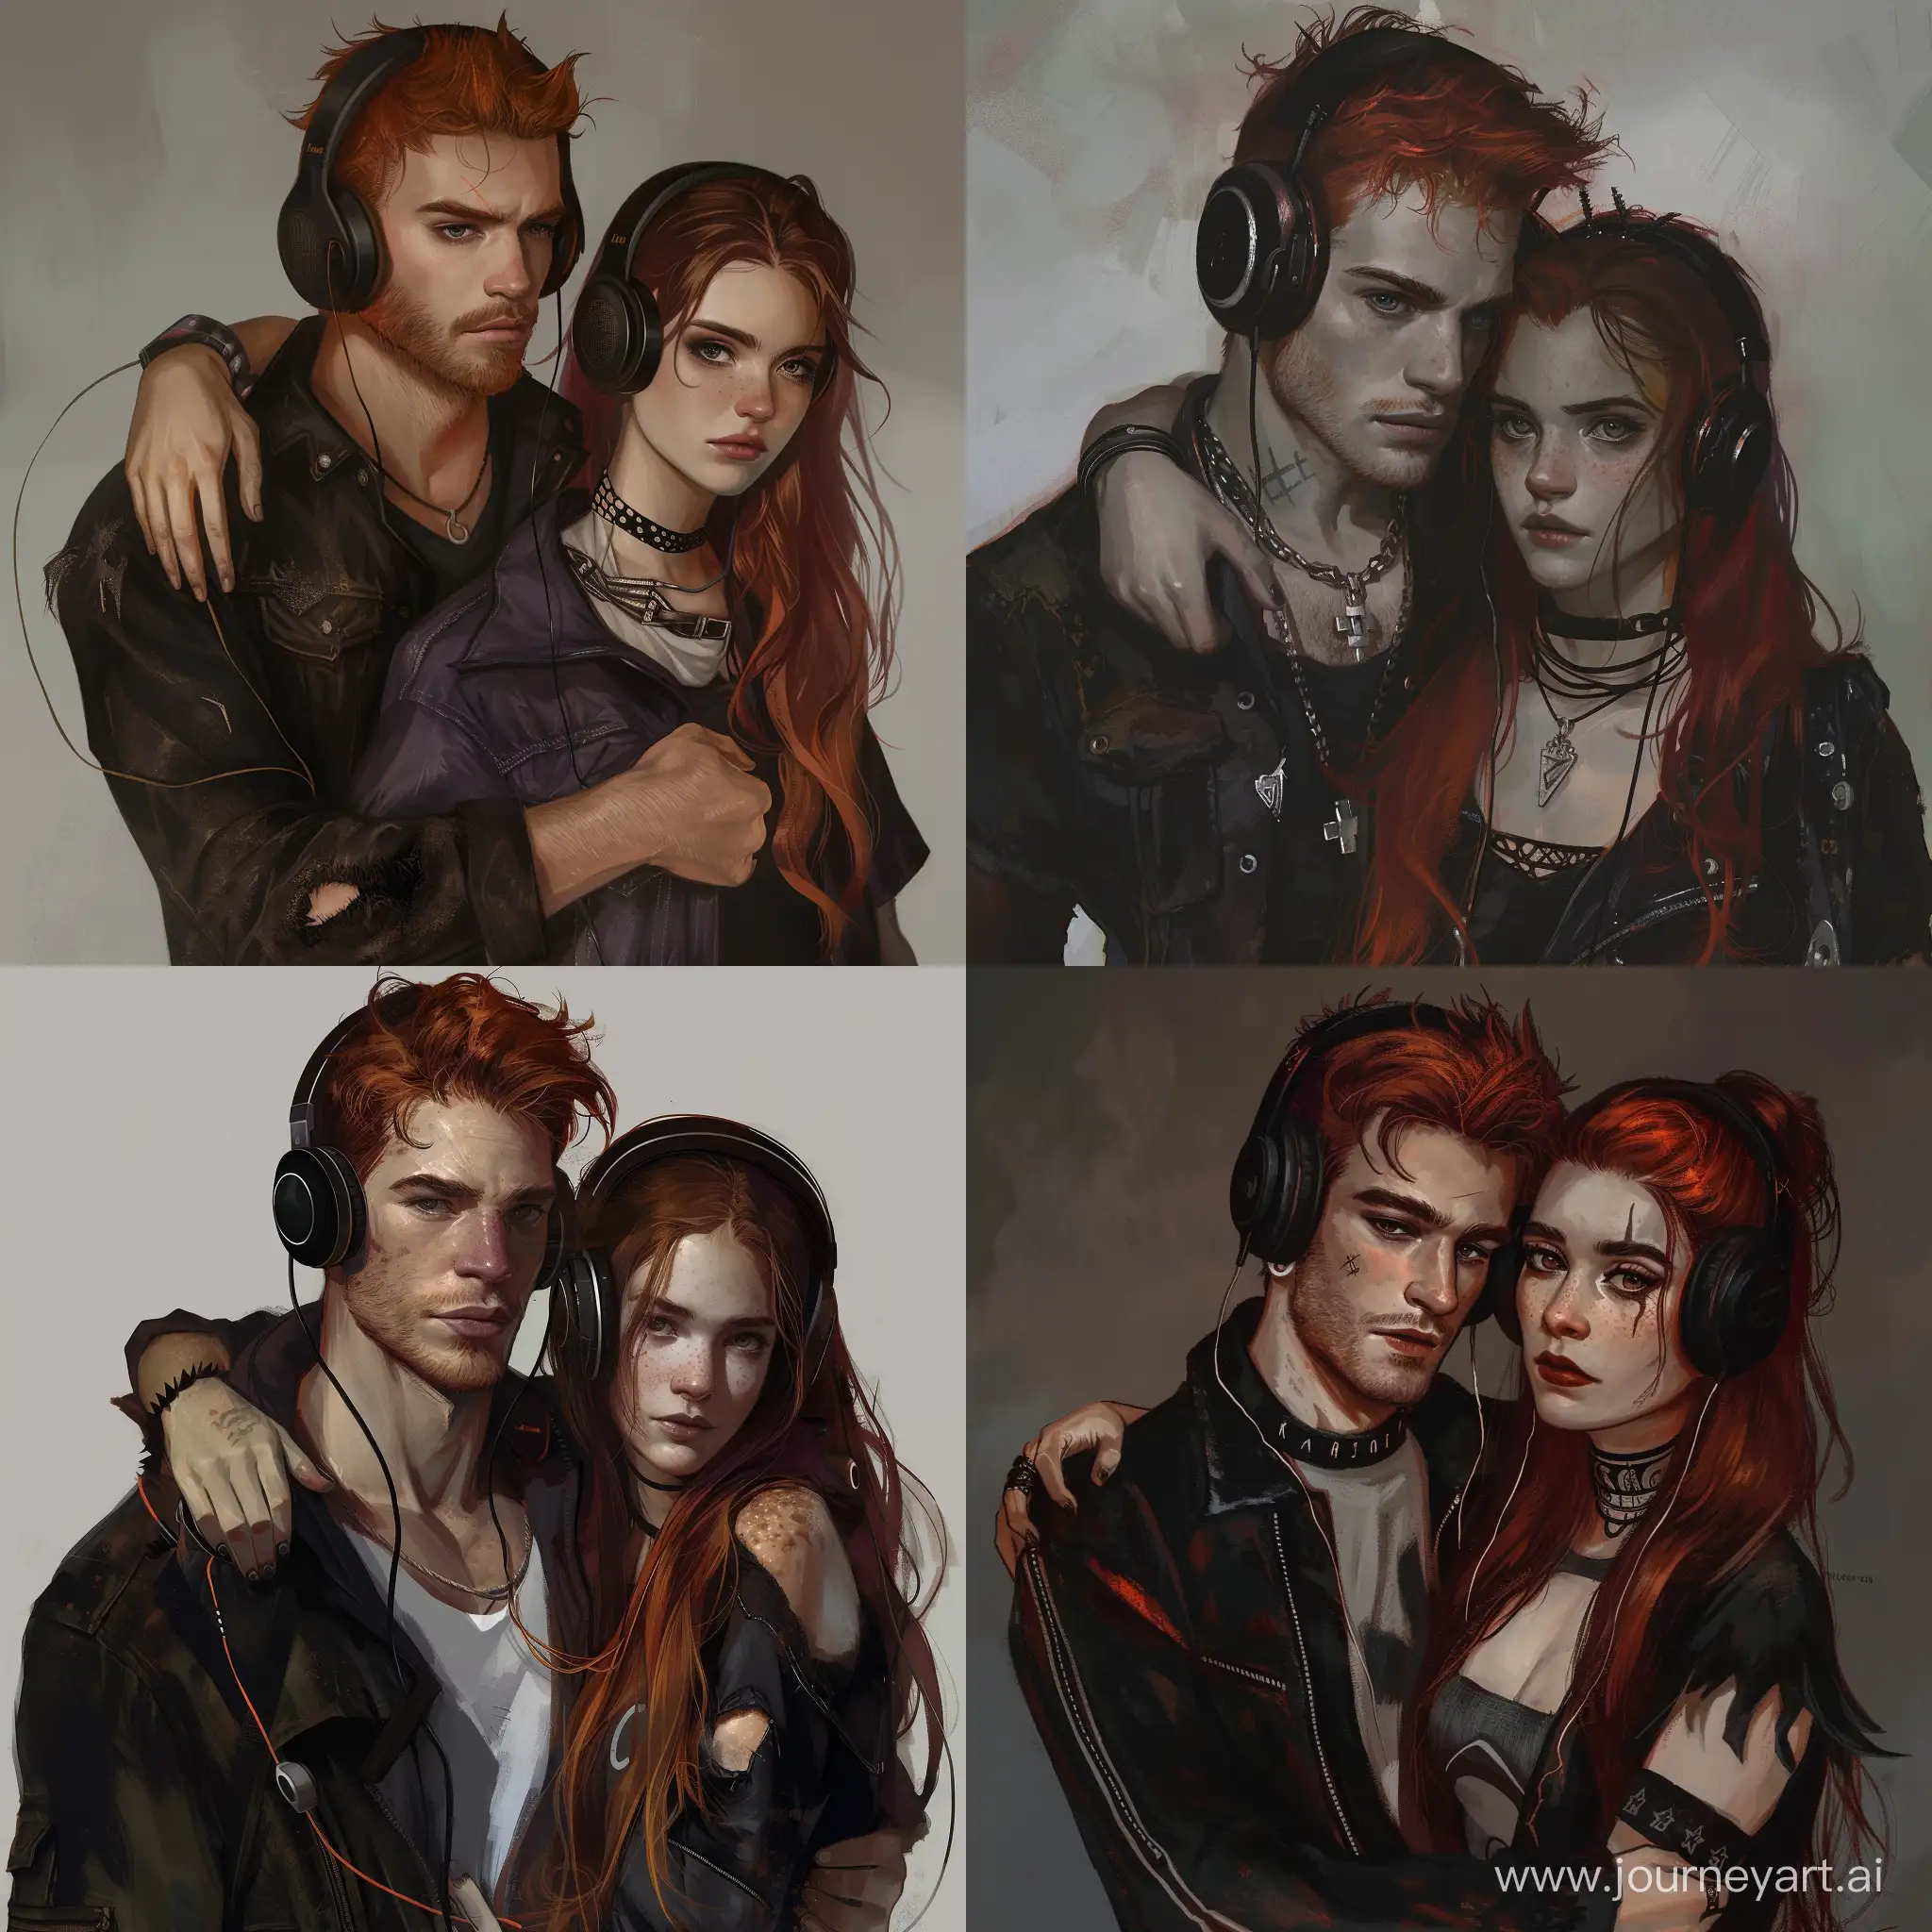 elizabeth peyton style. a 40 year old man with red hair and a 5 o clock shadow. a 20 year old girl in goth clothing with long auburn hair. both are wearing over the ear headphones. the man has his arm around the girl